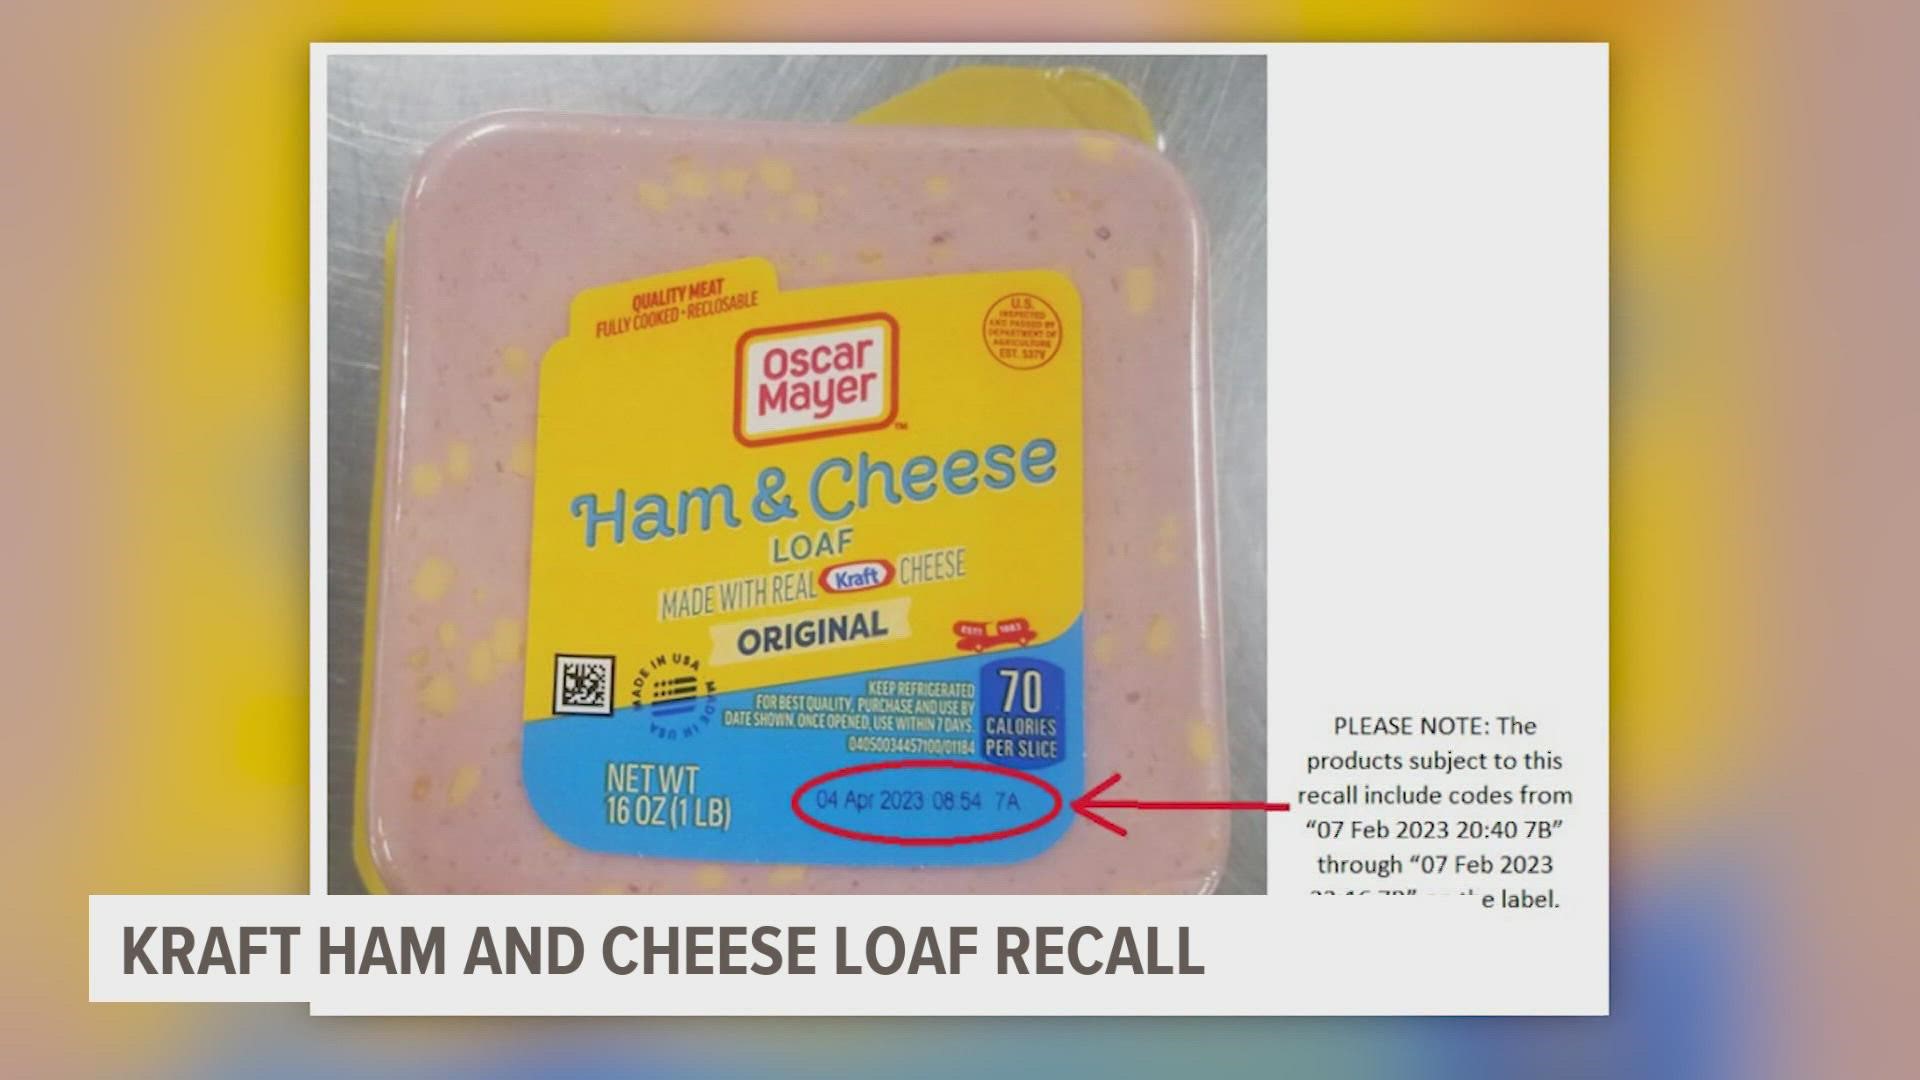 There have been no reports of illness linked to the recalled items.